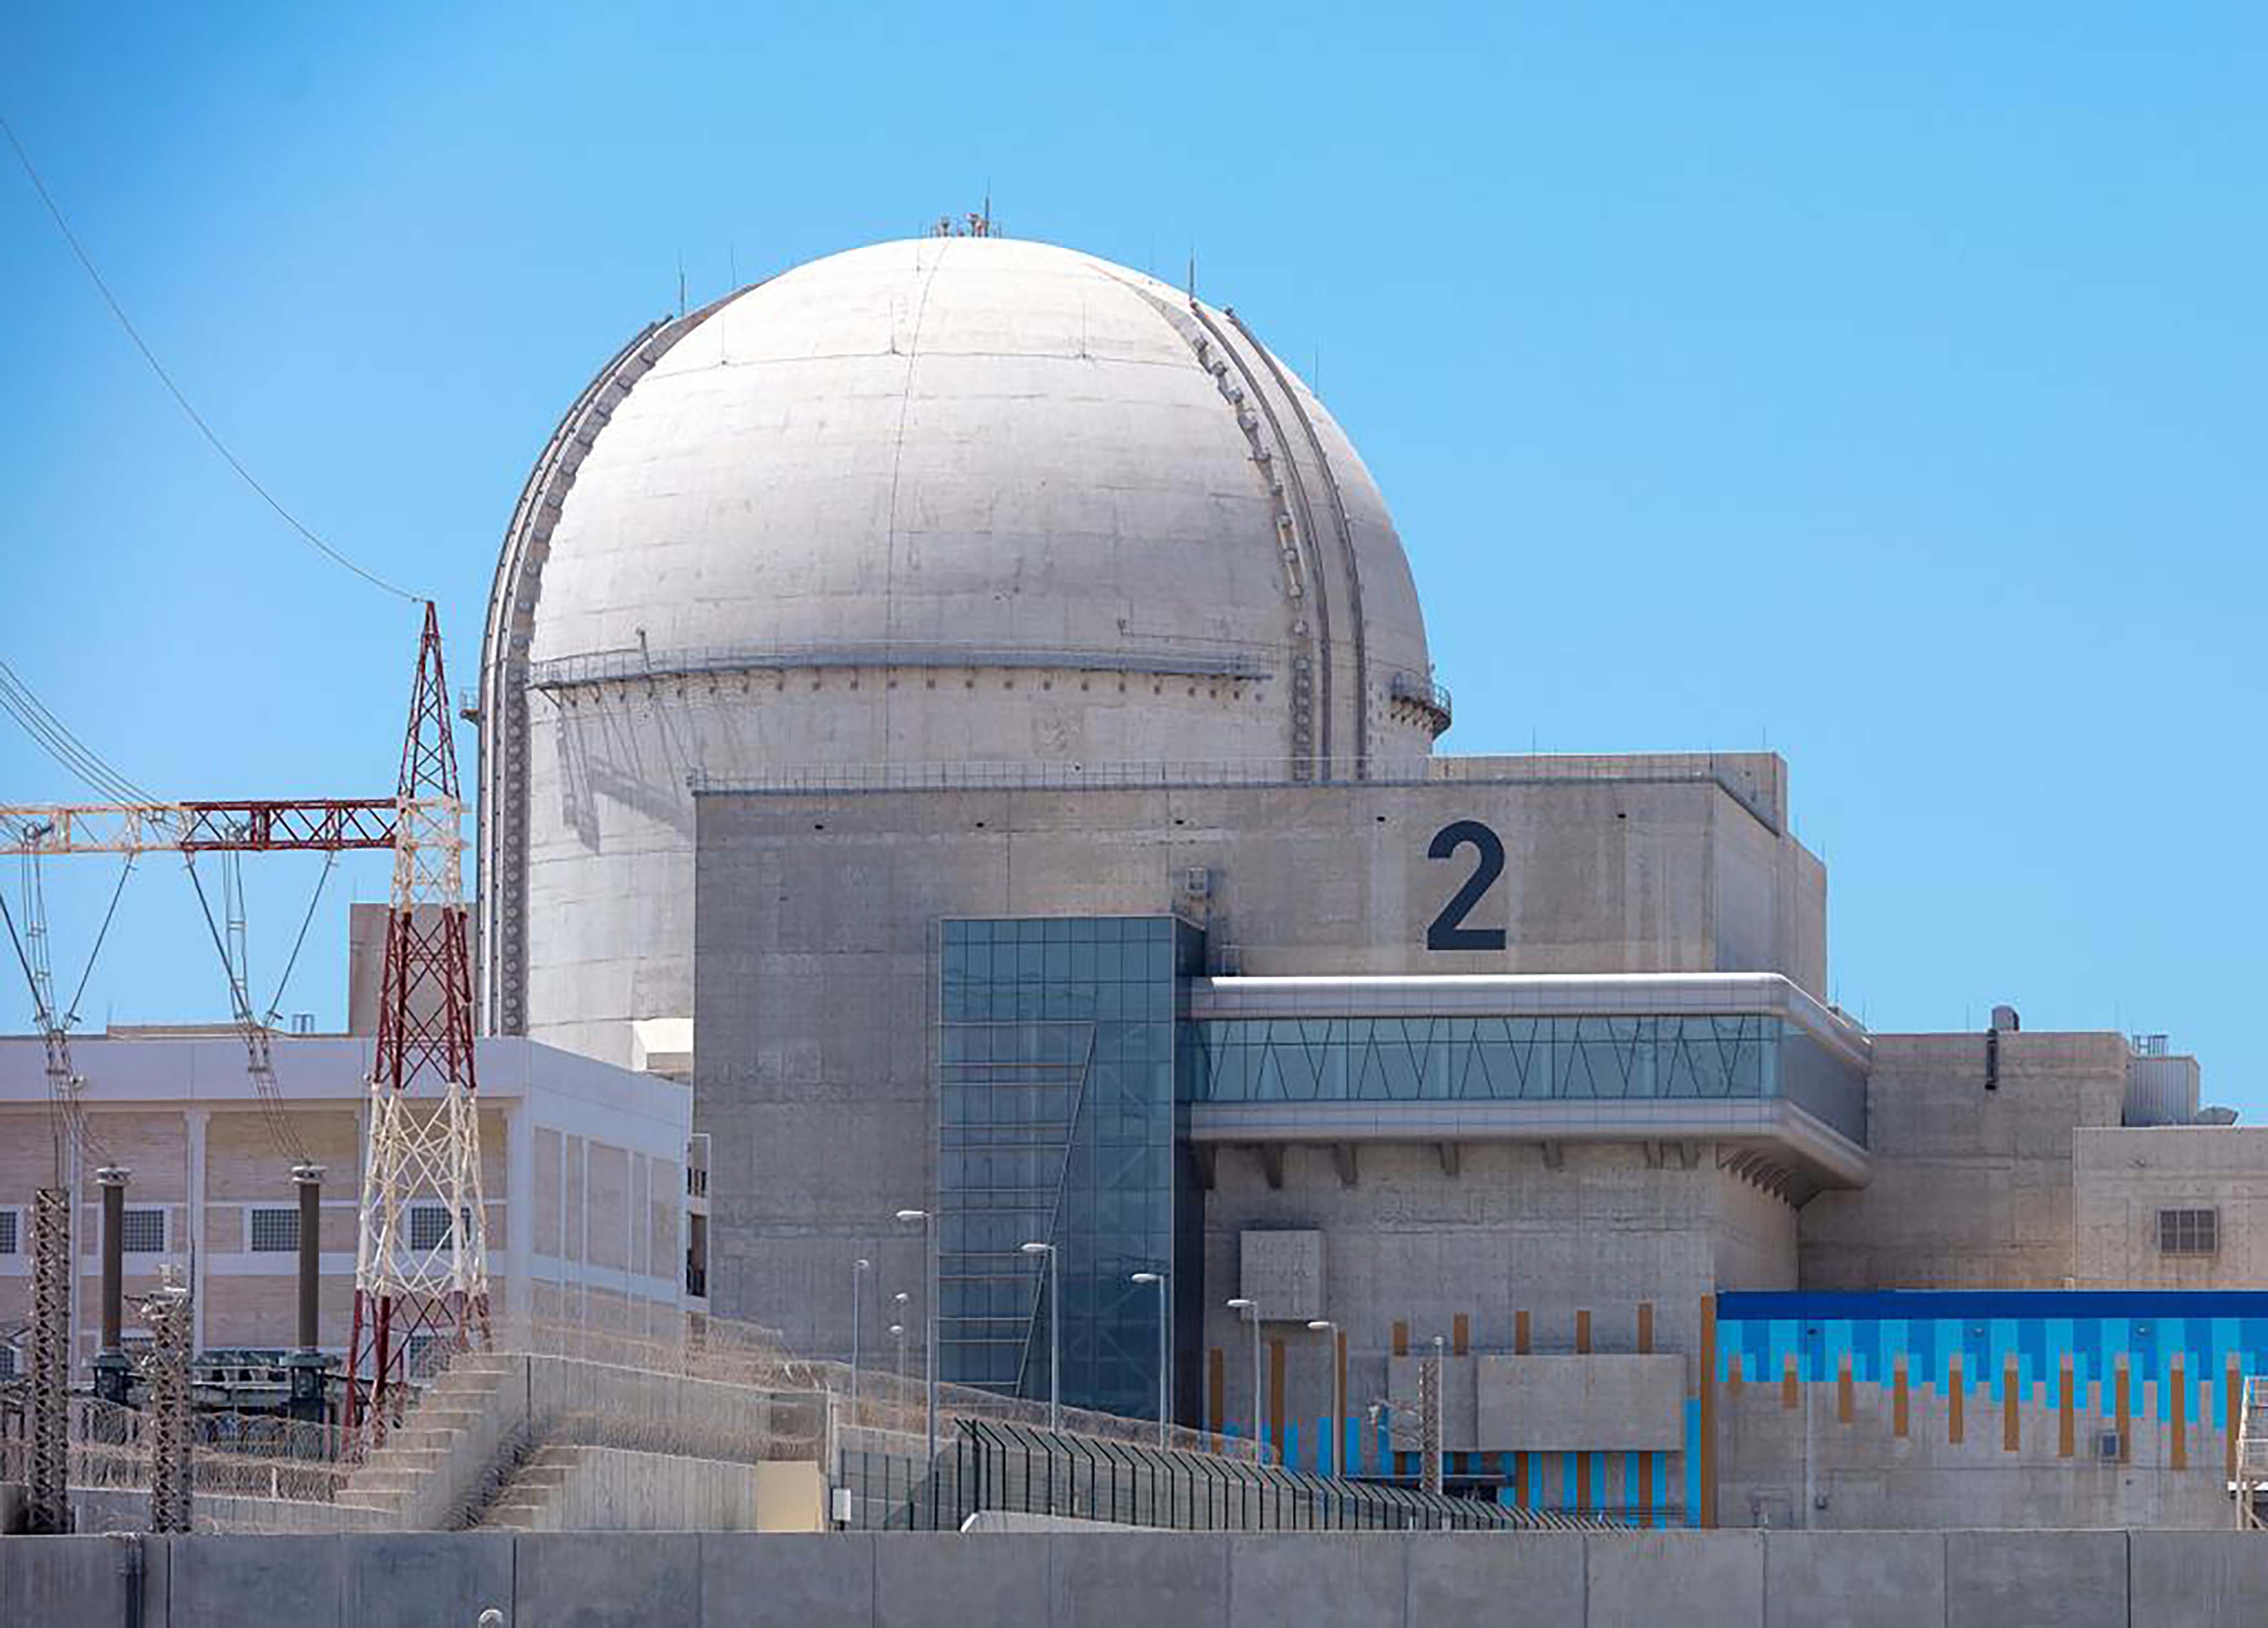 World Nuclear Association Congratulates UAE For Successful Start-Up Of Second Unit At Barakah Nuclear Power Plant